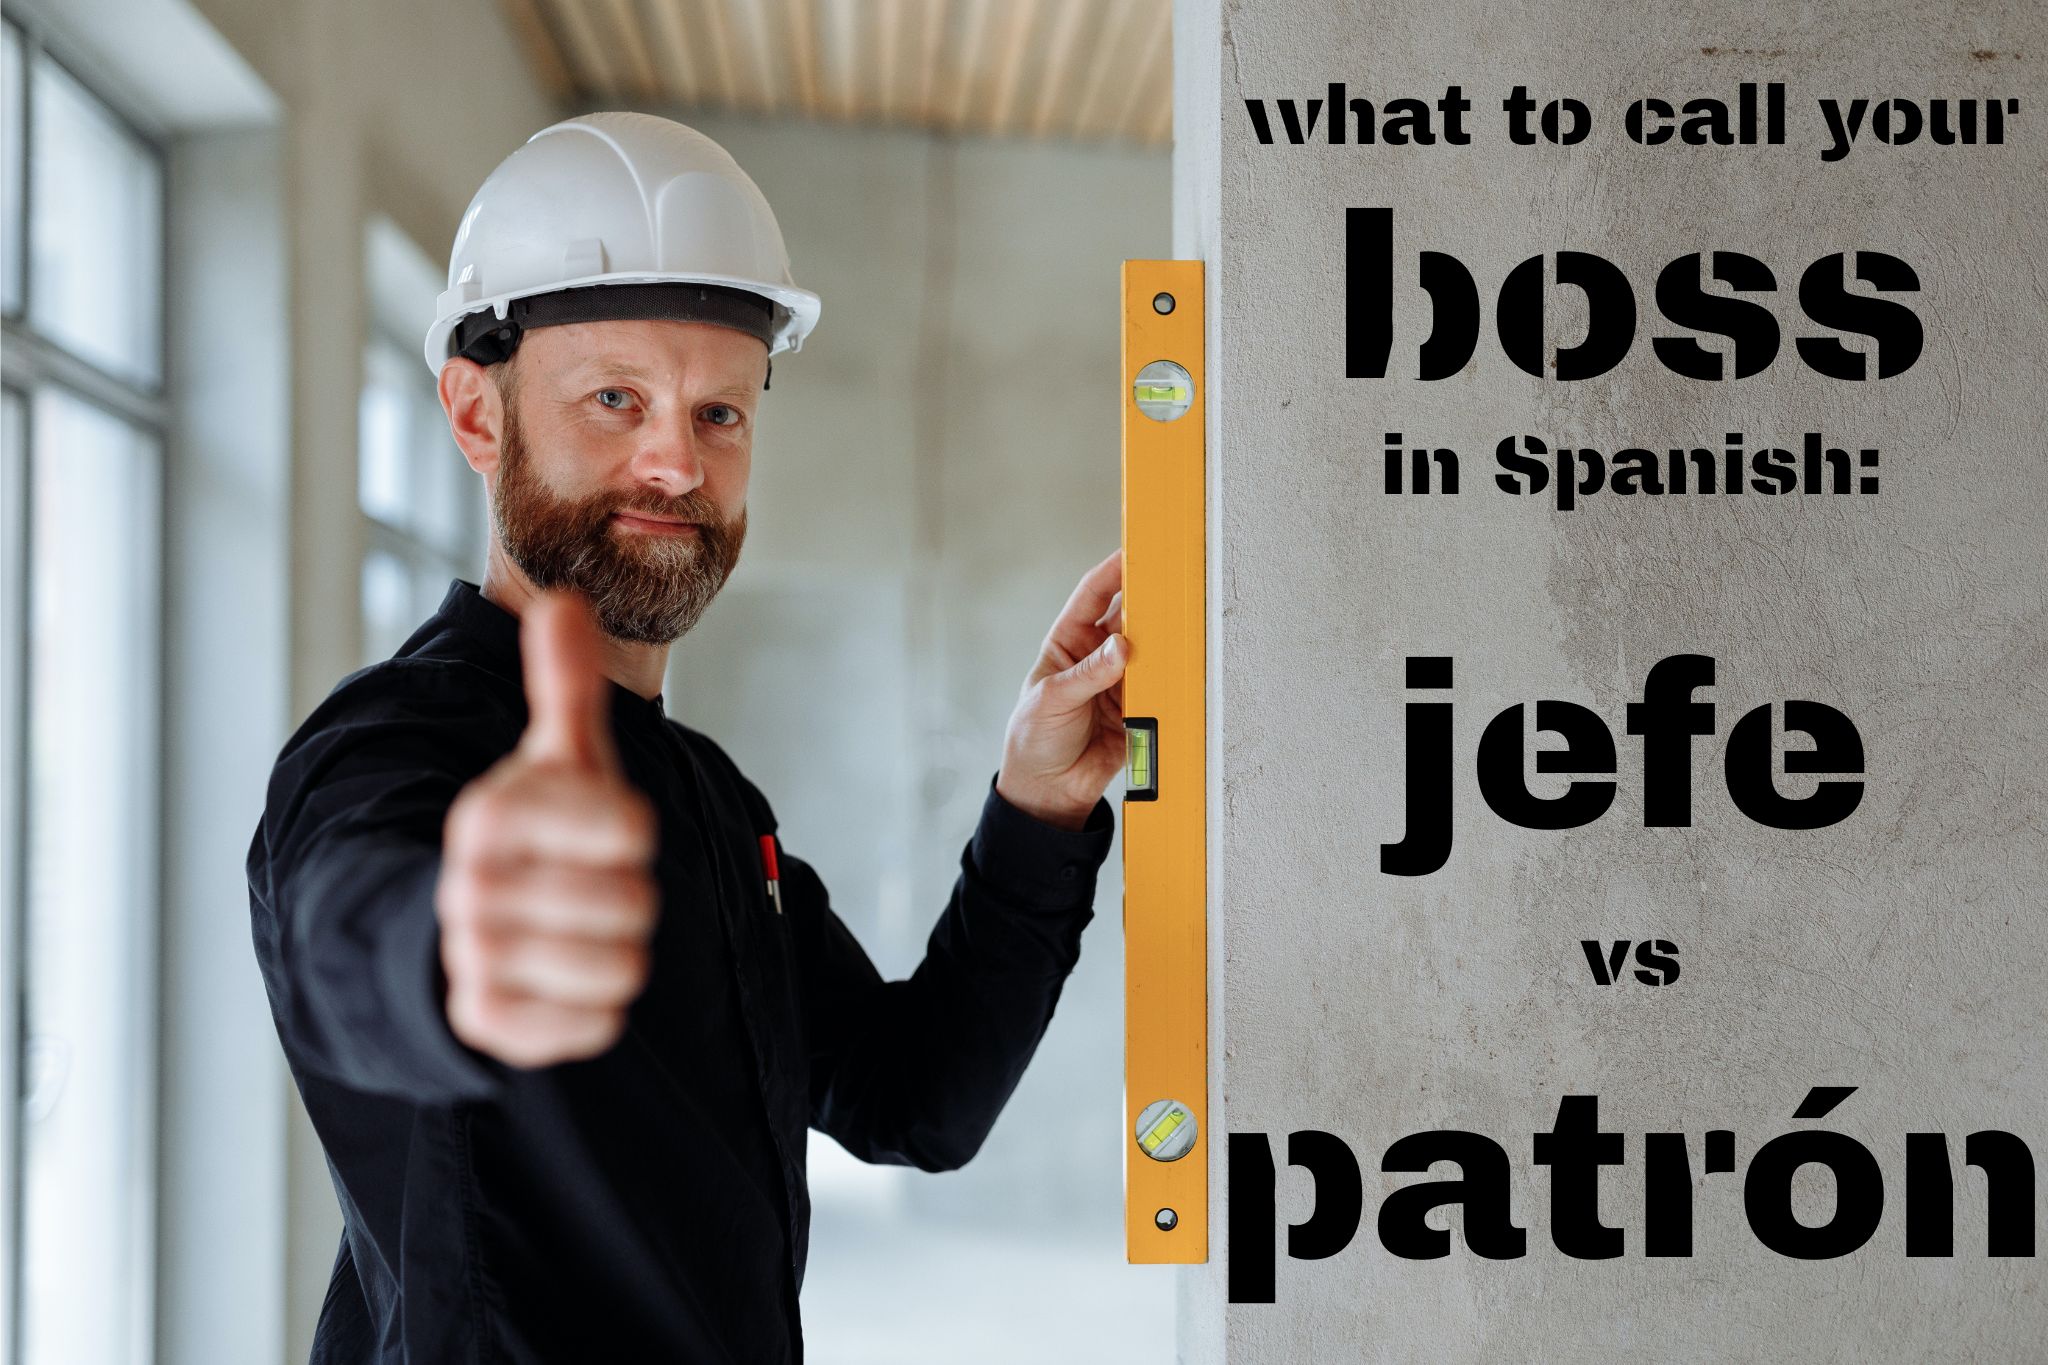 Jefe vs Patrón: The nuances addressing your Boss in Spanish